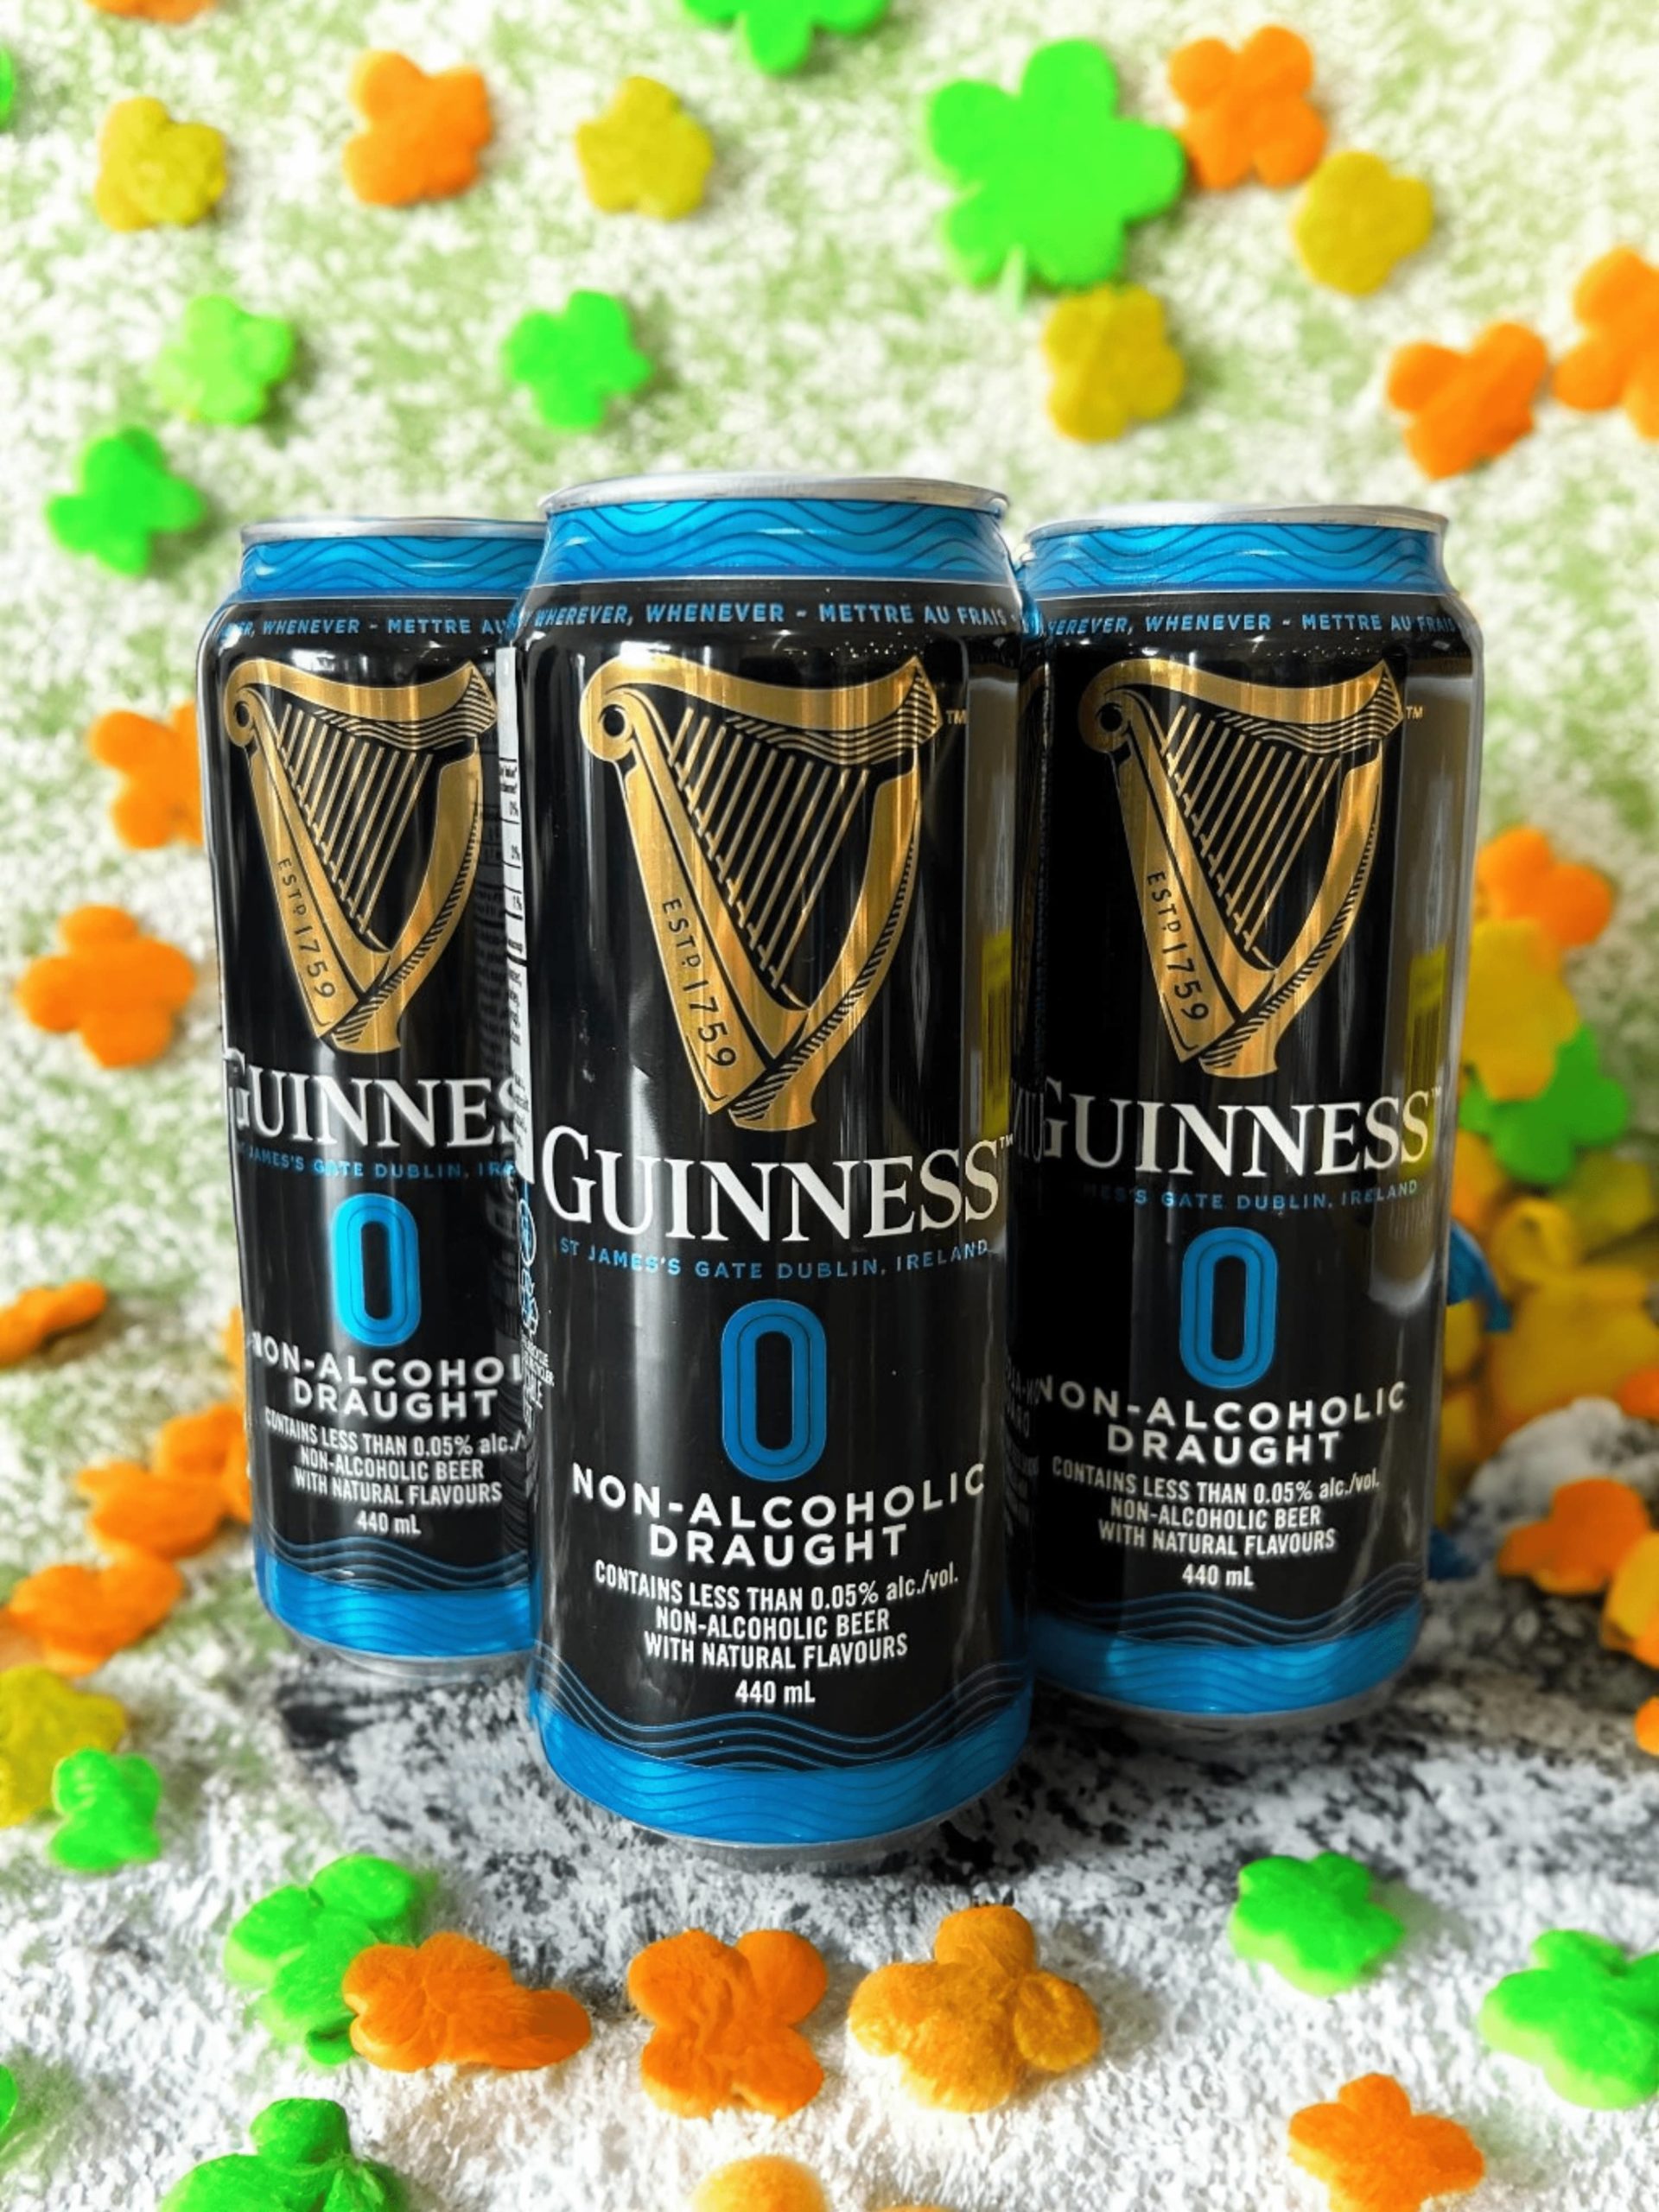 Guinness 0 non alcoholic beer